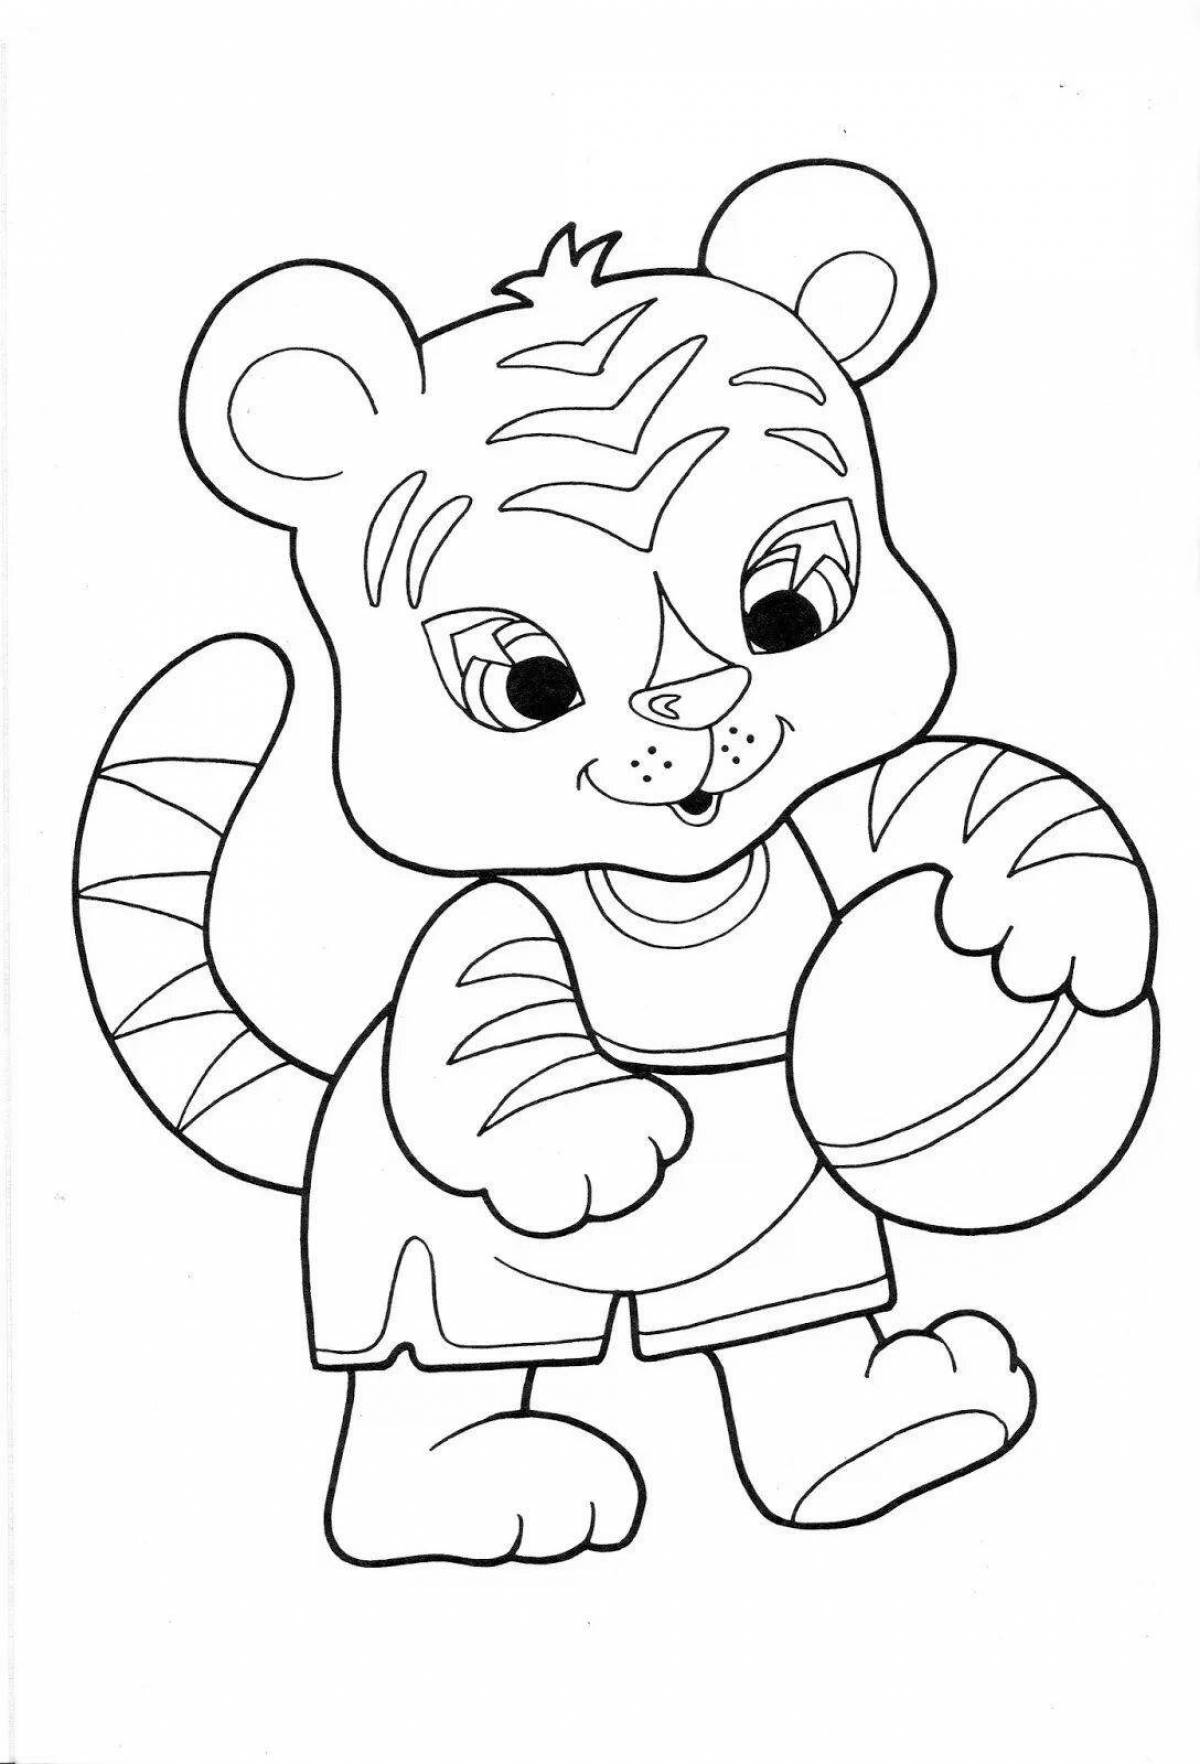 Playful animal coloring for kids